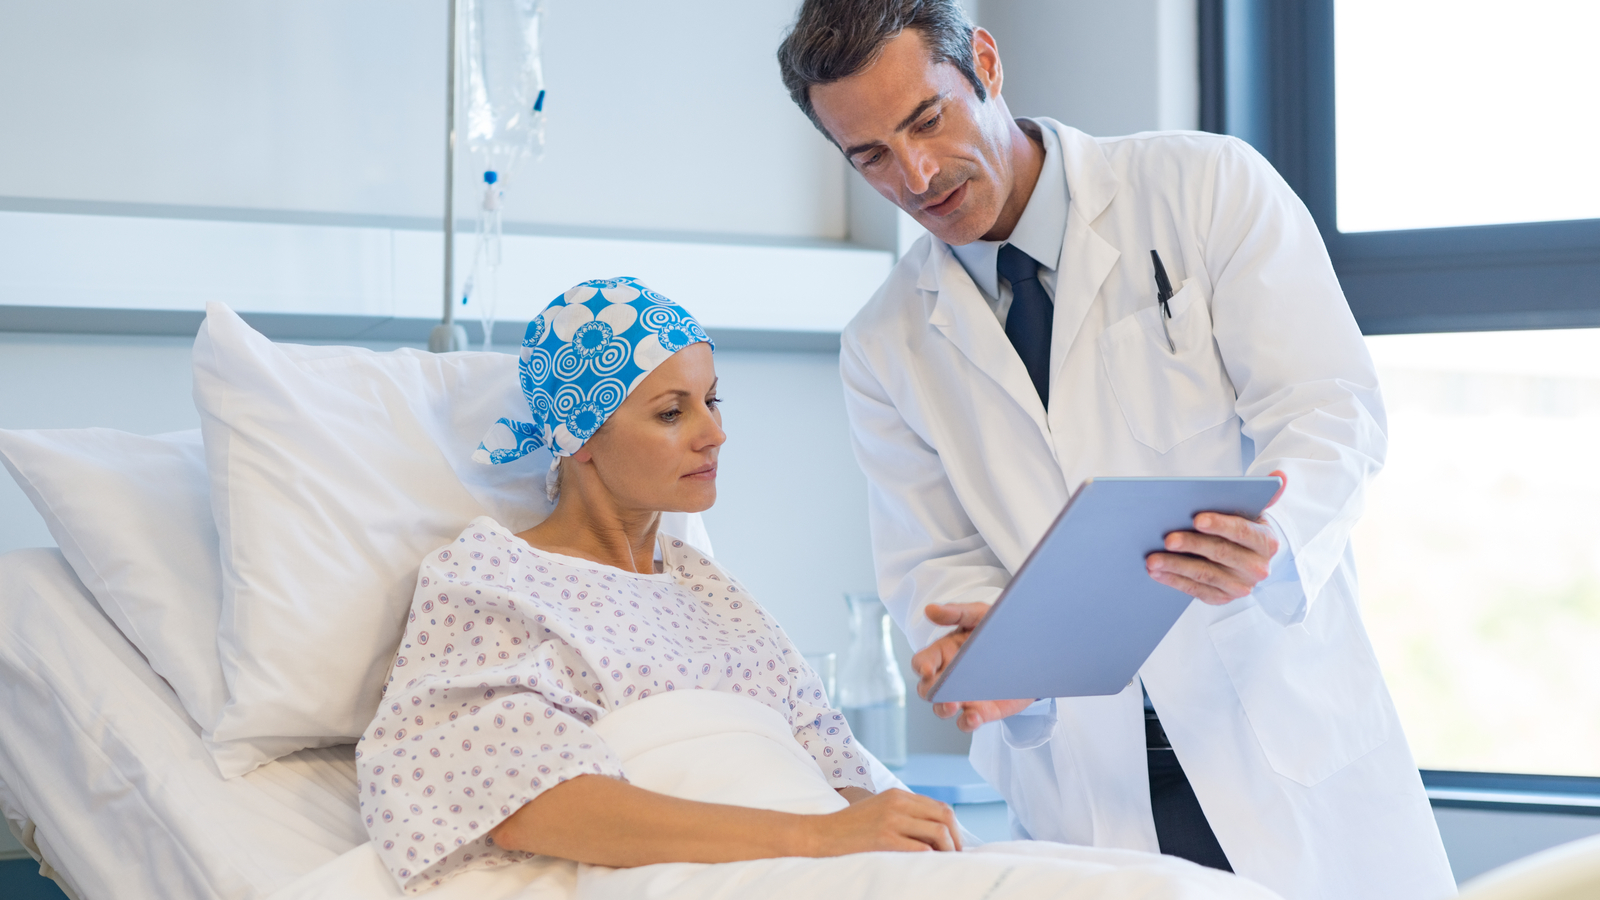 Image of a doctor showing a patient a chart representing ICCM stock.